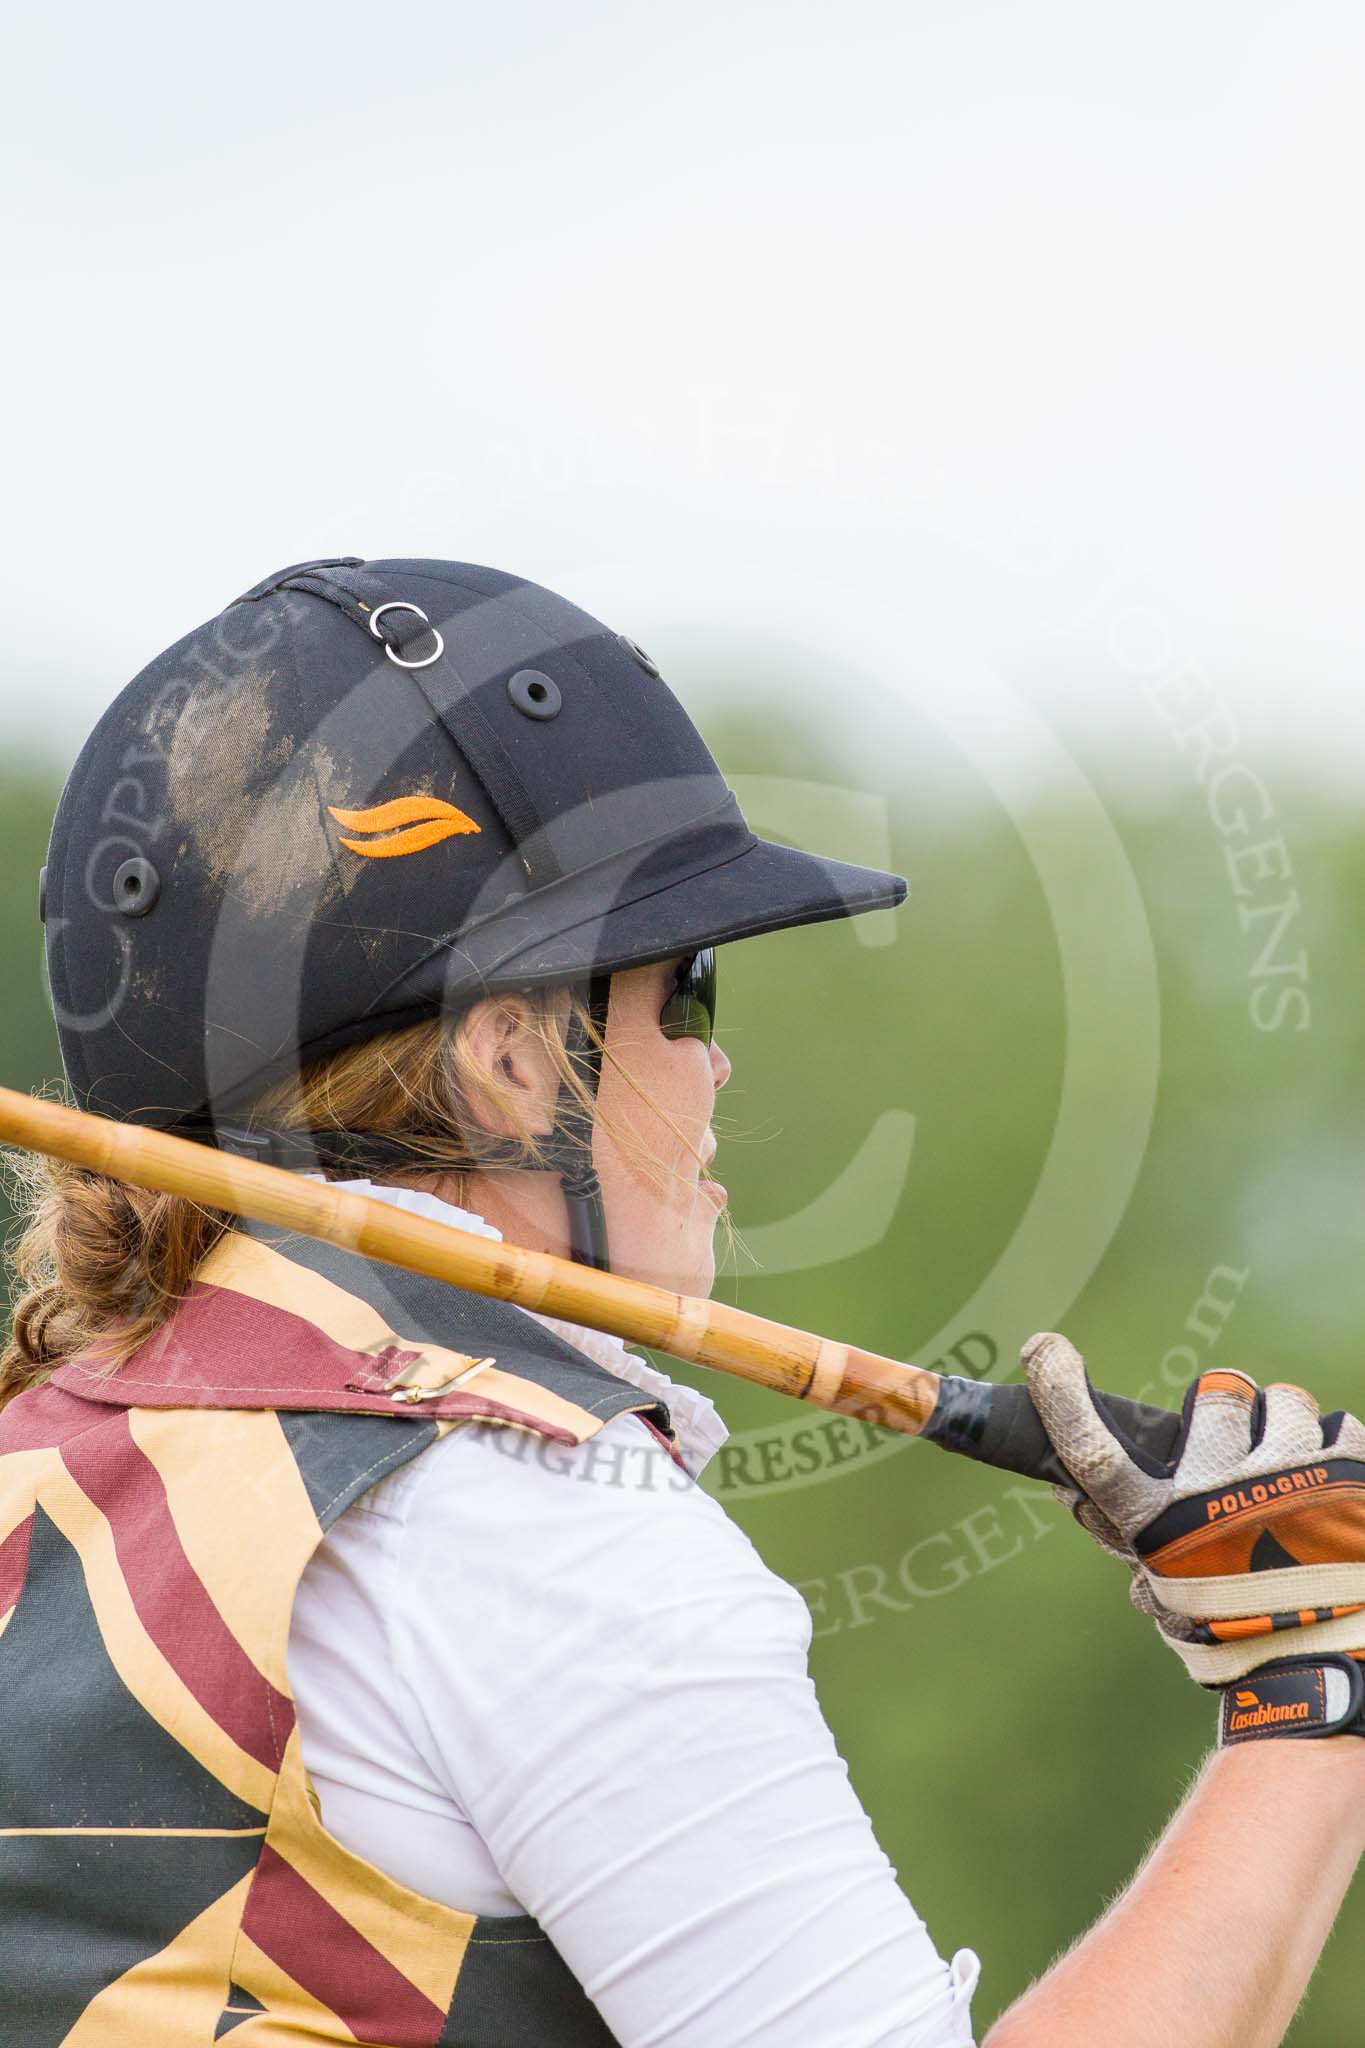 7th Heritage Polo Cup semi-finals: Rosie Ross waiting for play..
Hurtwood Park Polo Club,
Ewhurst Green,
Surrey,
United Kingdom,
on 04 August 2012 at 14:24, image #218